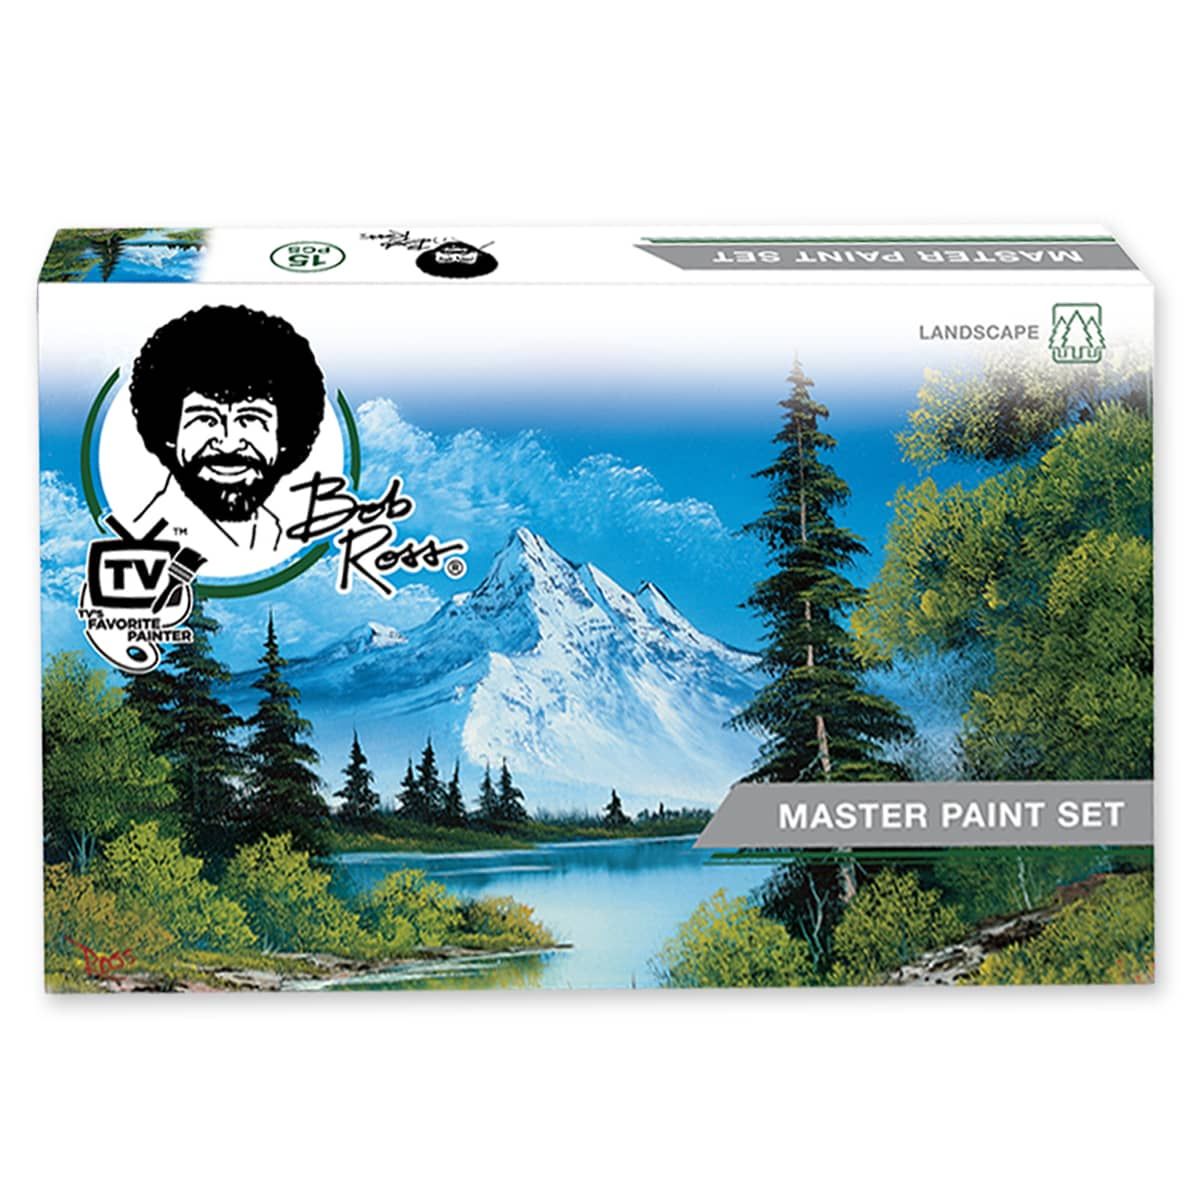 I just received, the Bob Ross Master Paint set, ordered online